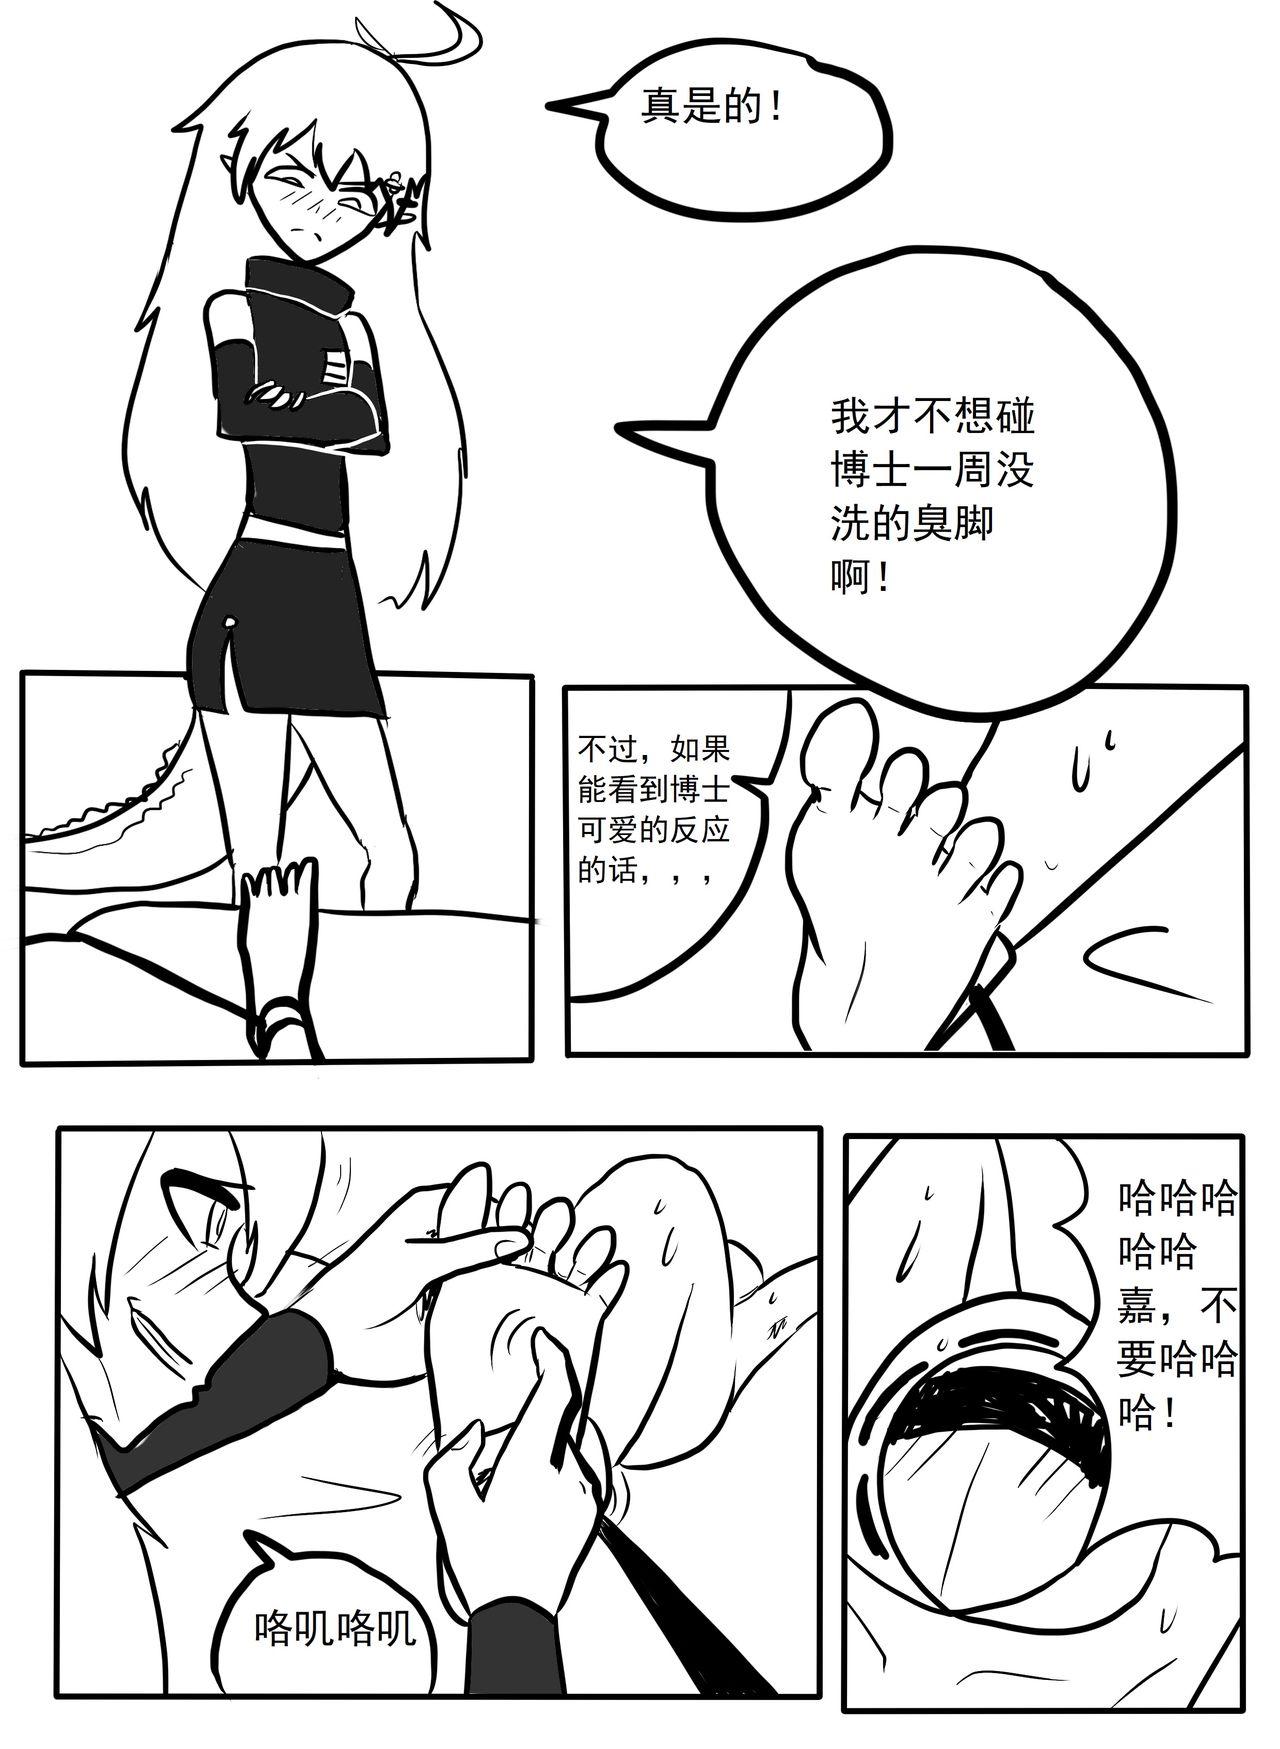 Taiwan Doctor Libido Processing - Arknights Spanking - Page 6